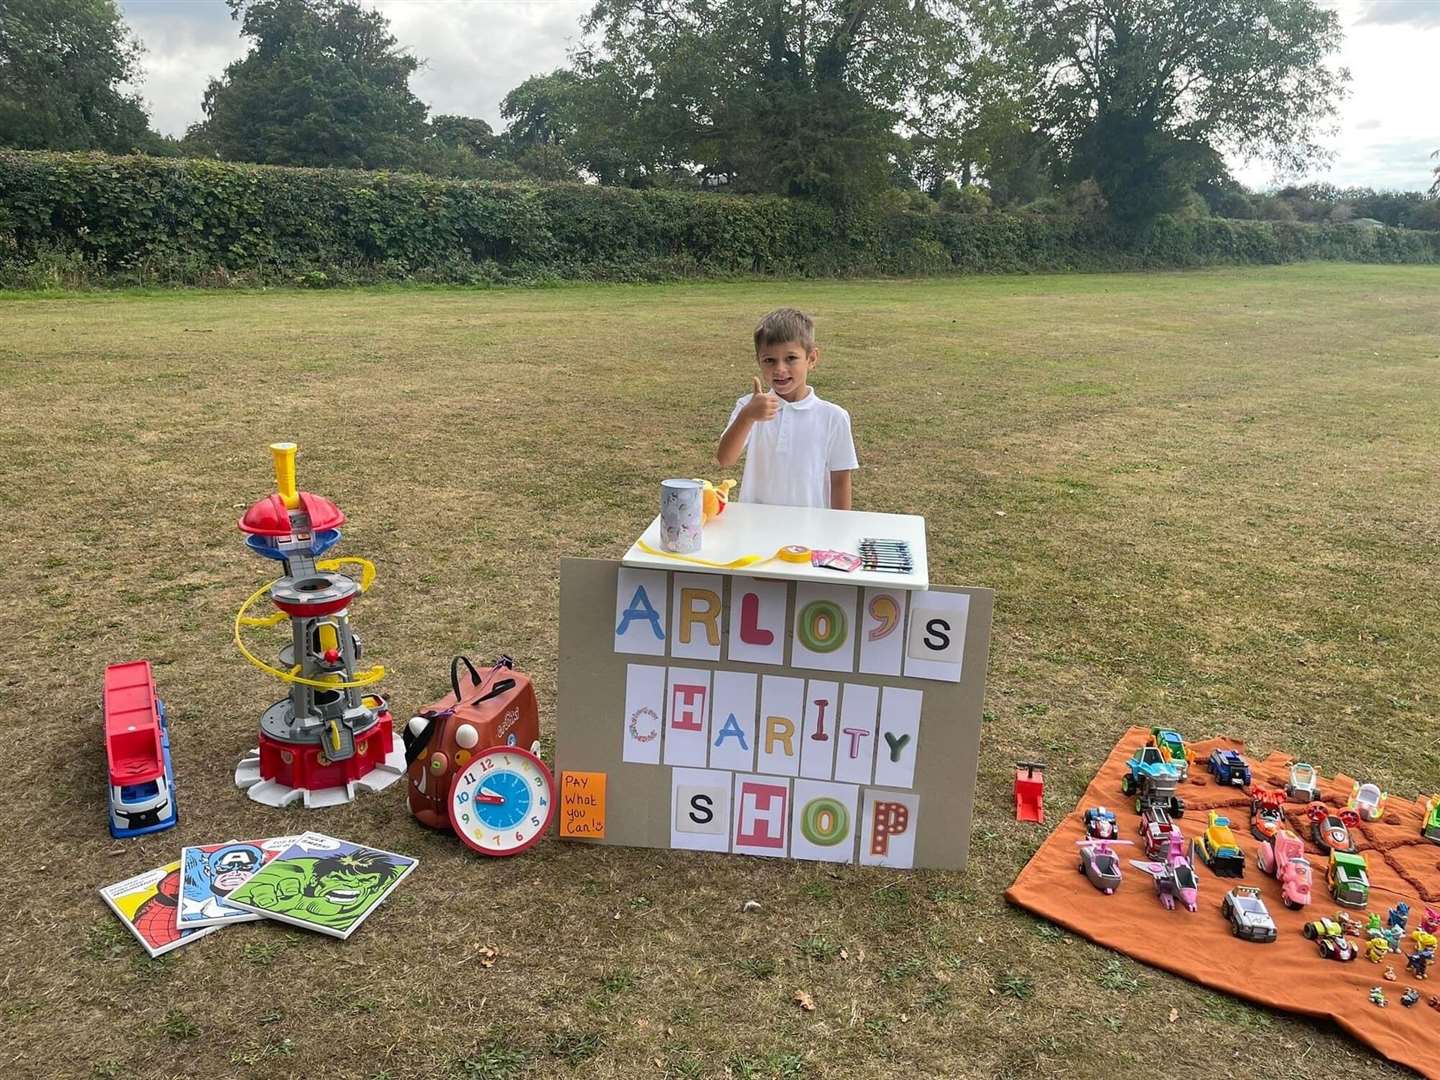 Arlo sold his toys to fundraise